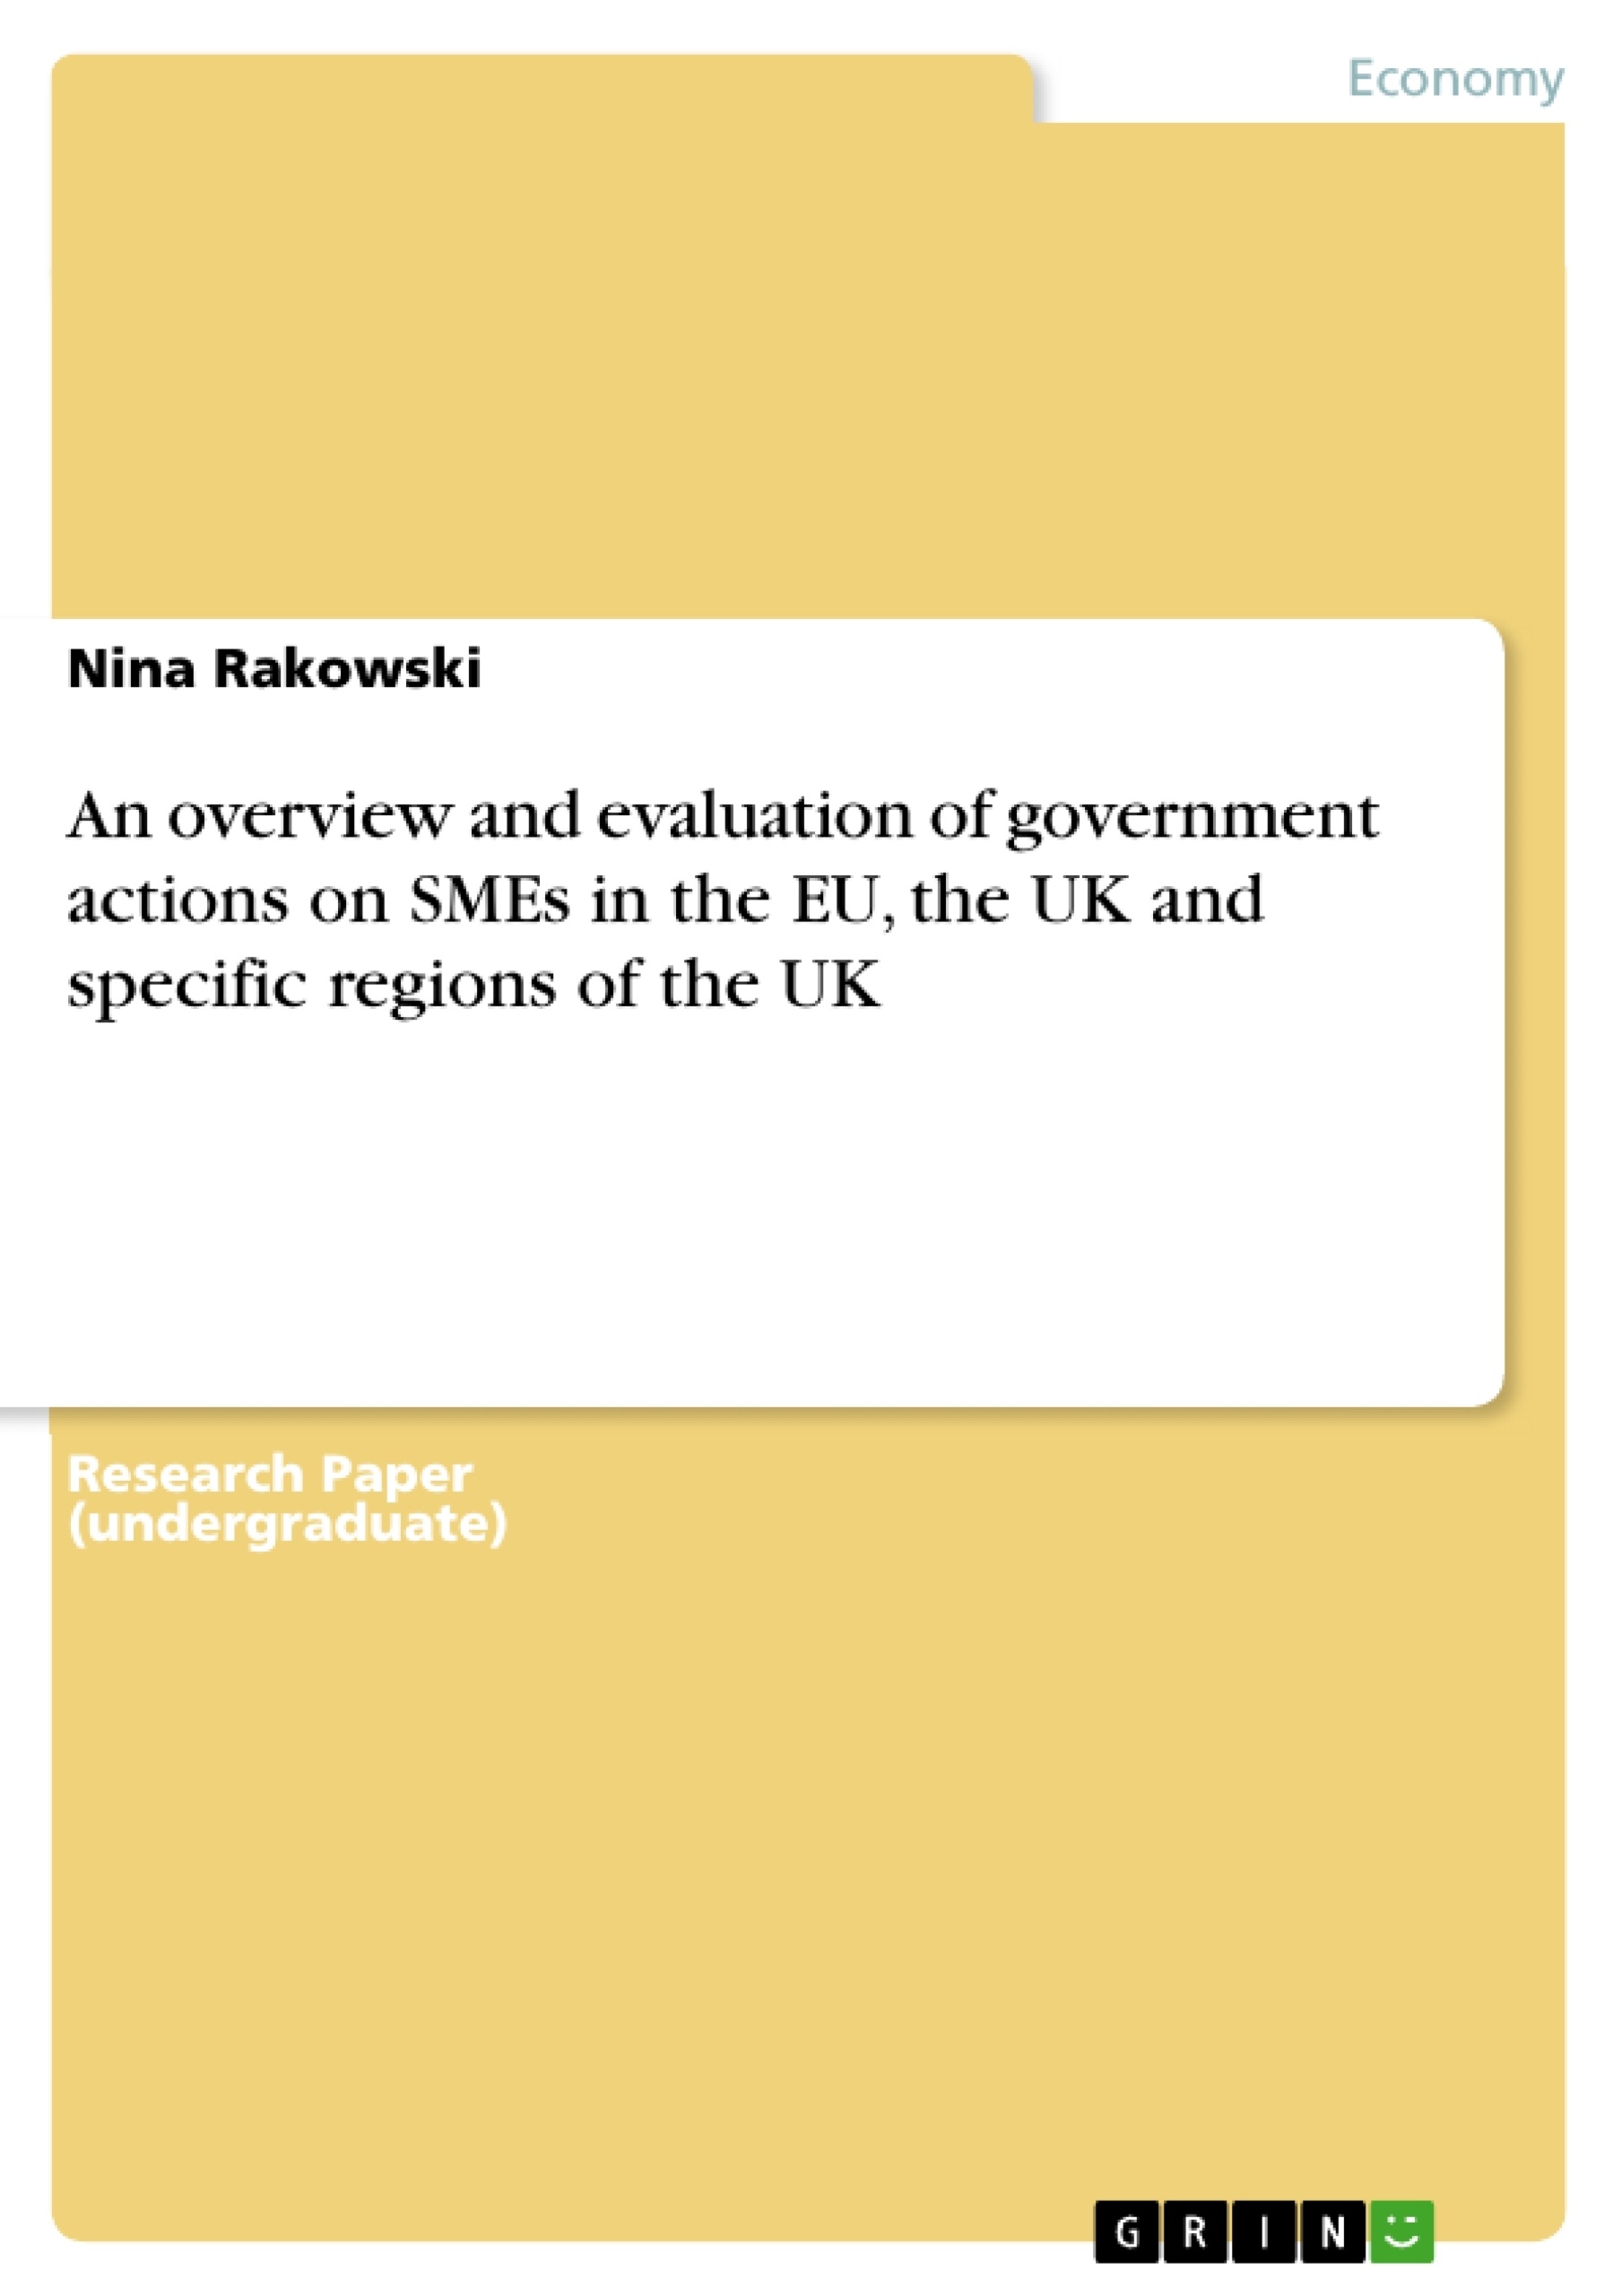 Title: An overview and evaluation of government actions on SMEs in the EU, the UK and specific regions of the UK